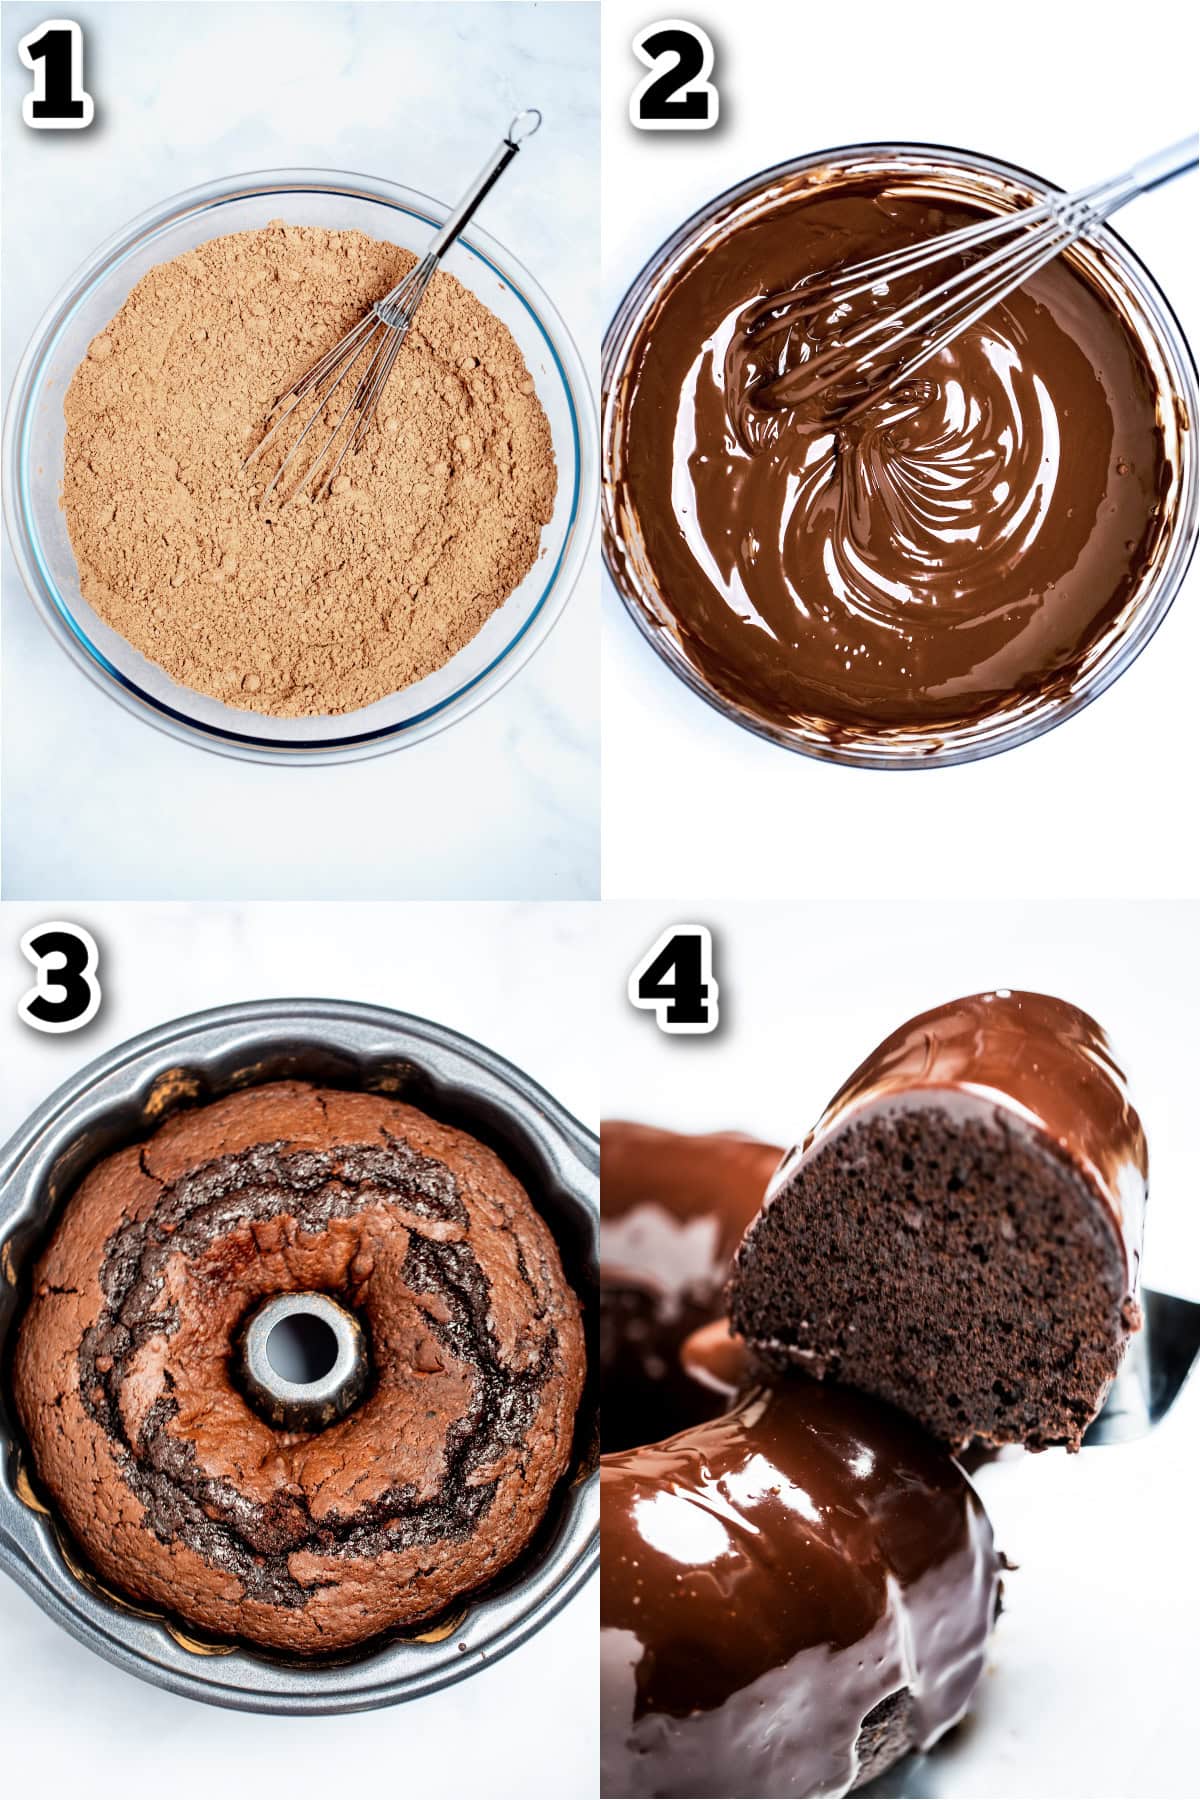 Step by step photos for how to make chocolate brownie cake.